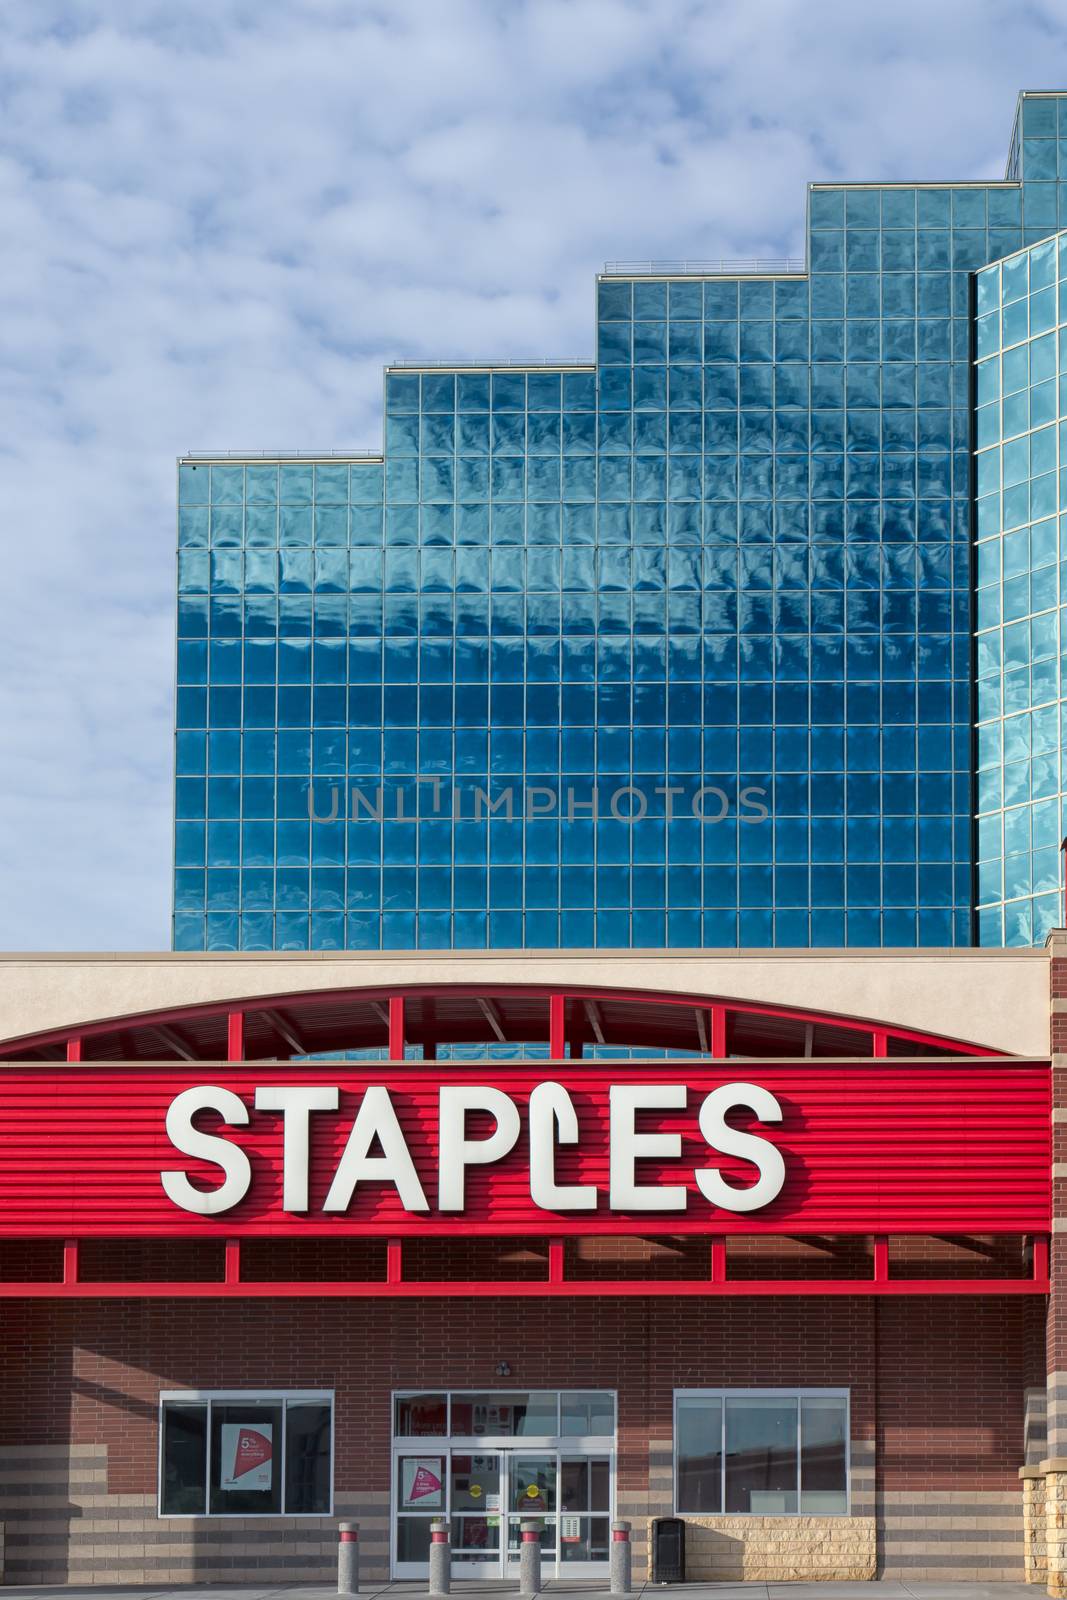 Staples Office Supply Store by wolterk